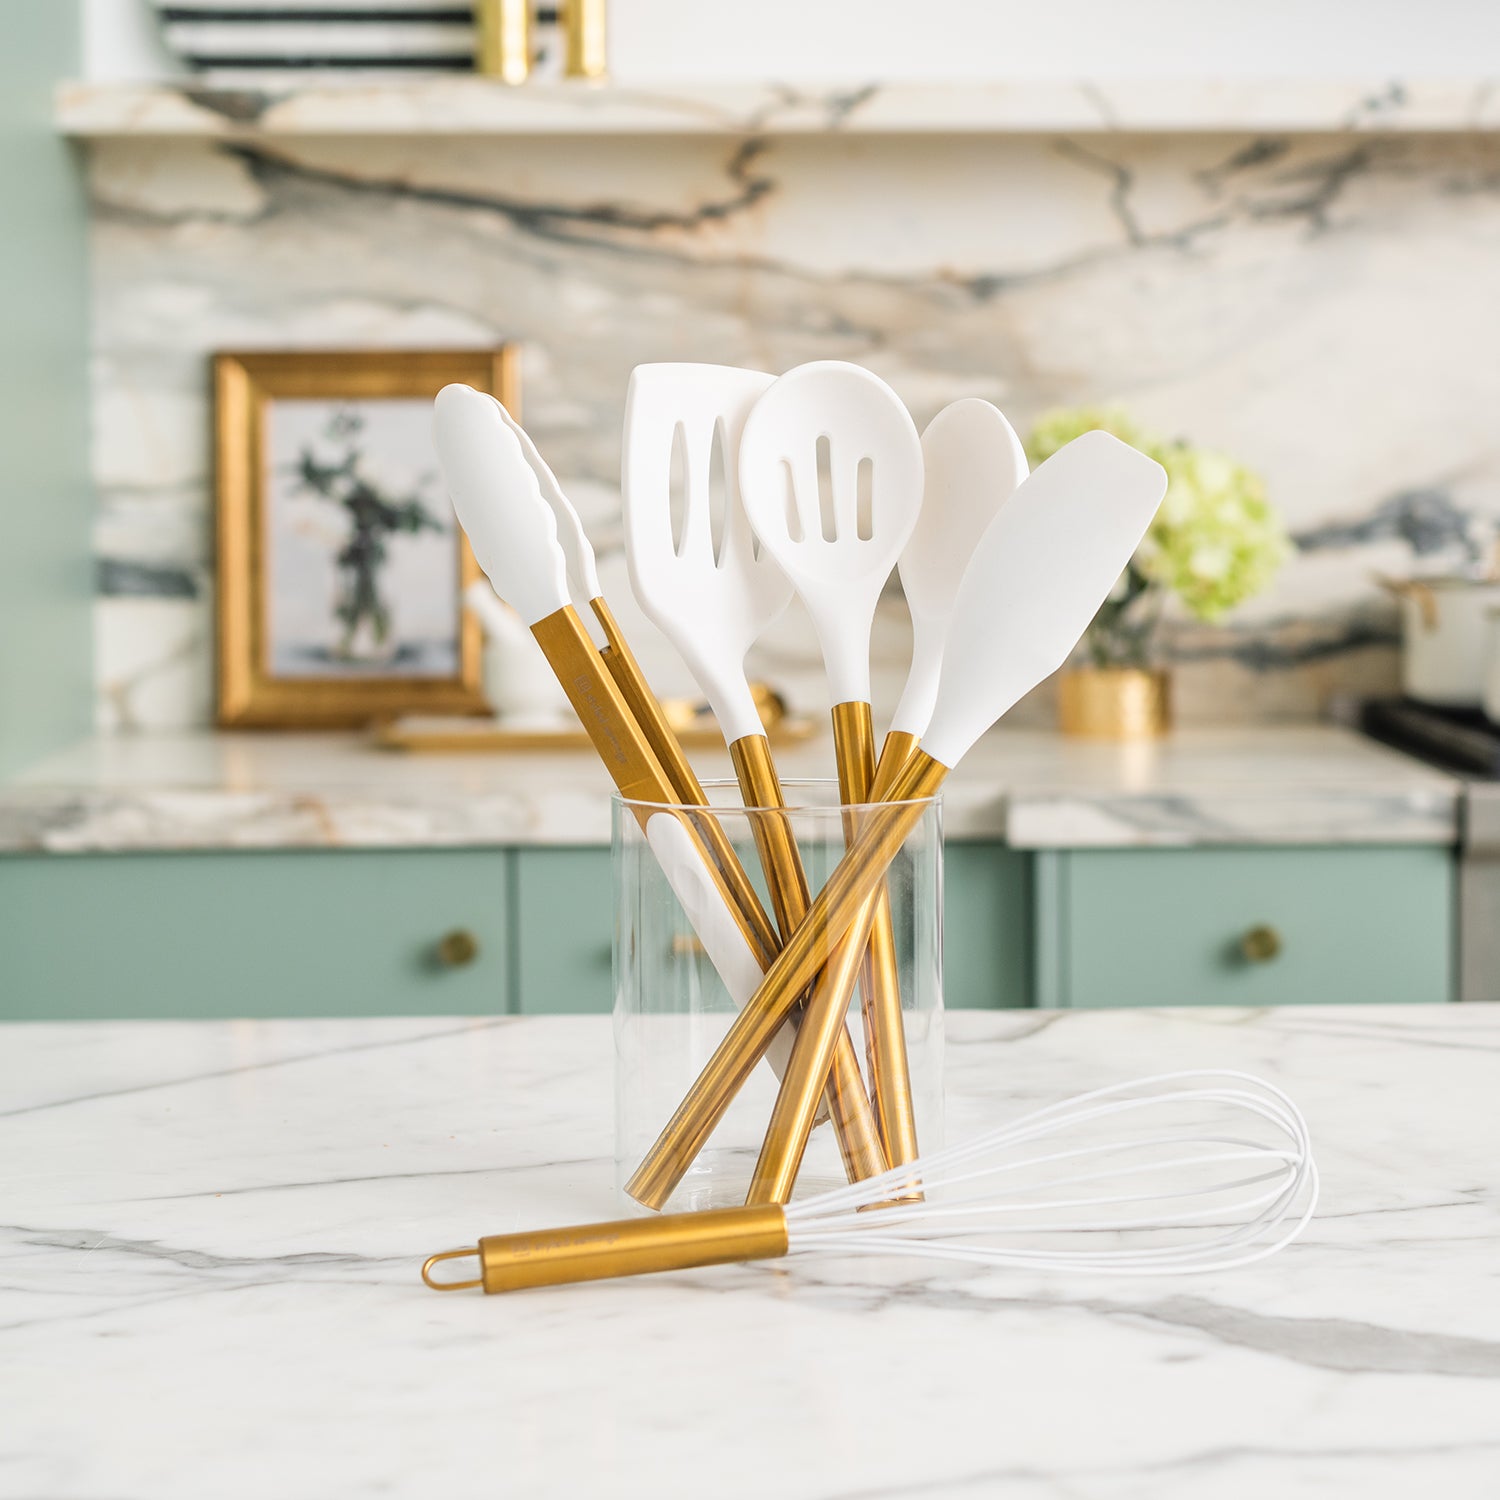 White and Gold Kitchen Utensils Set - Styled Settings